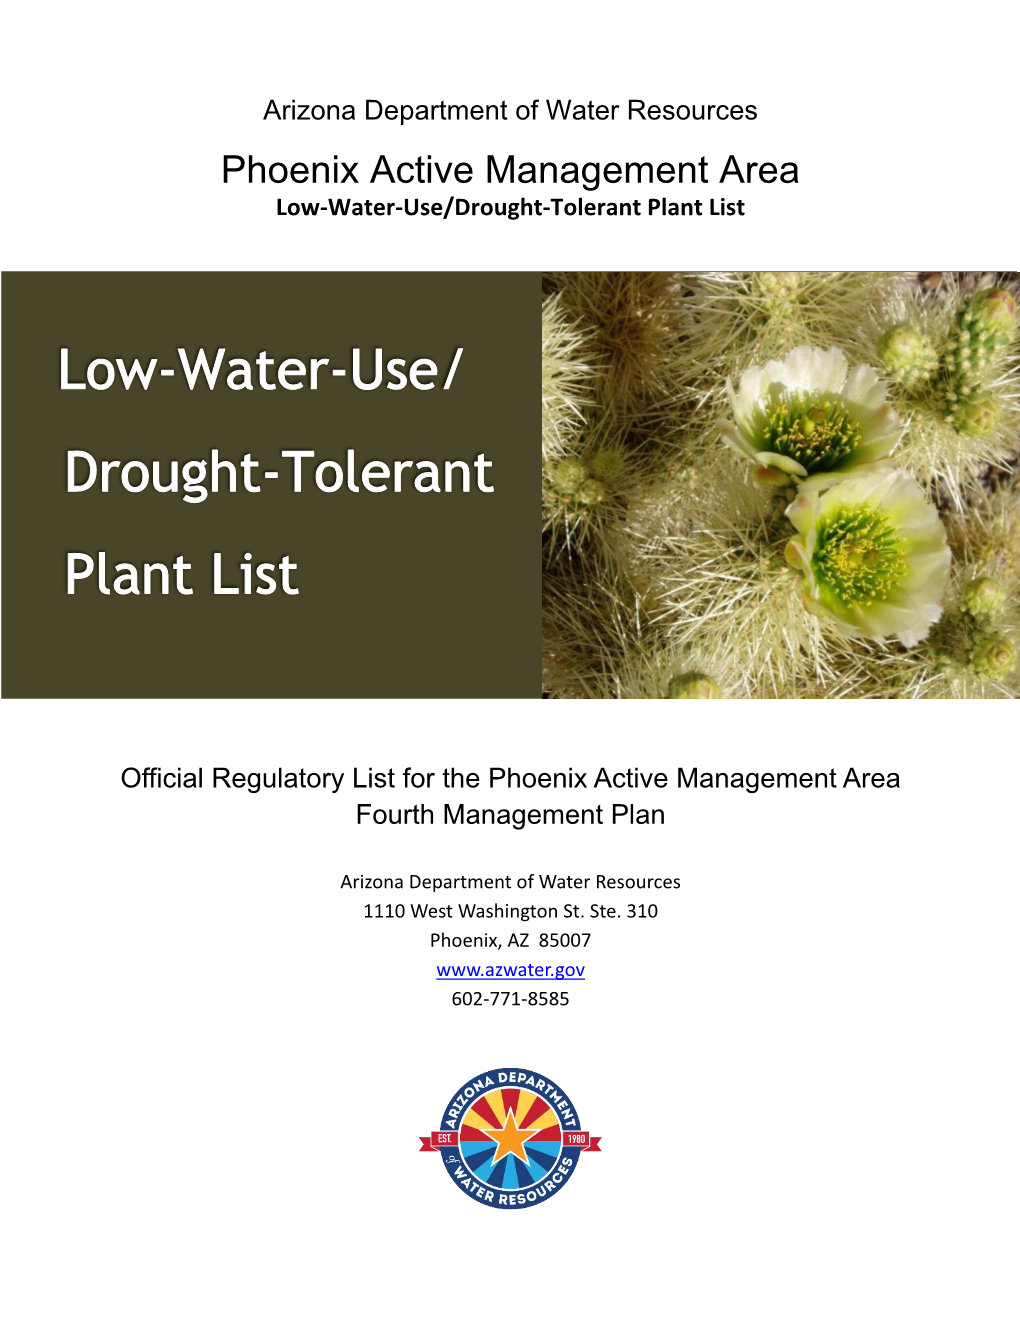 ADWR Low Water Use/Drought Tolerant Plant List